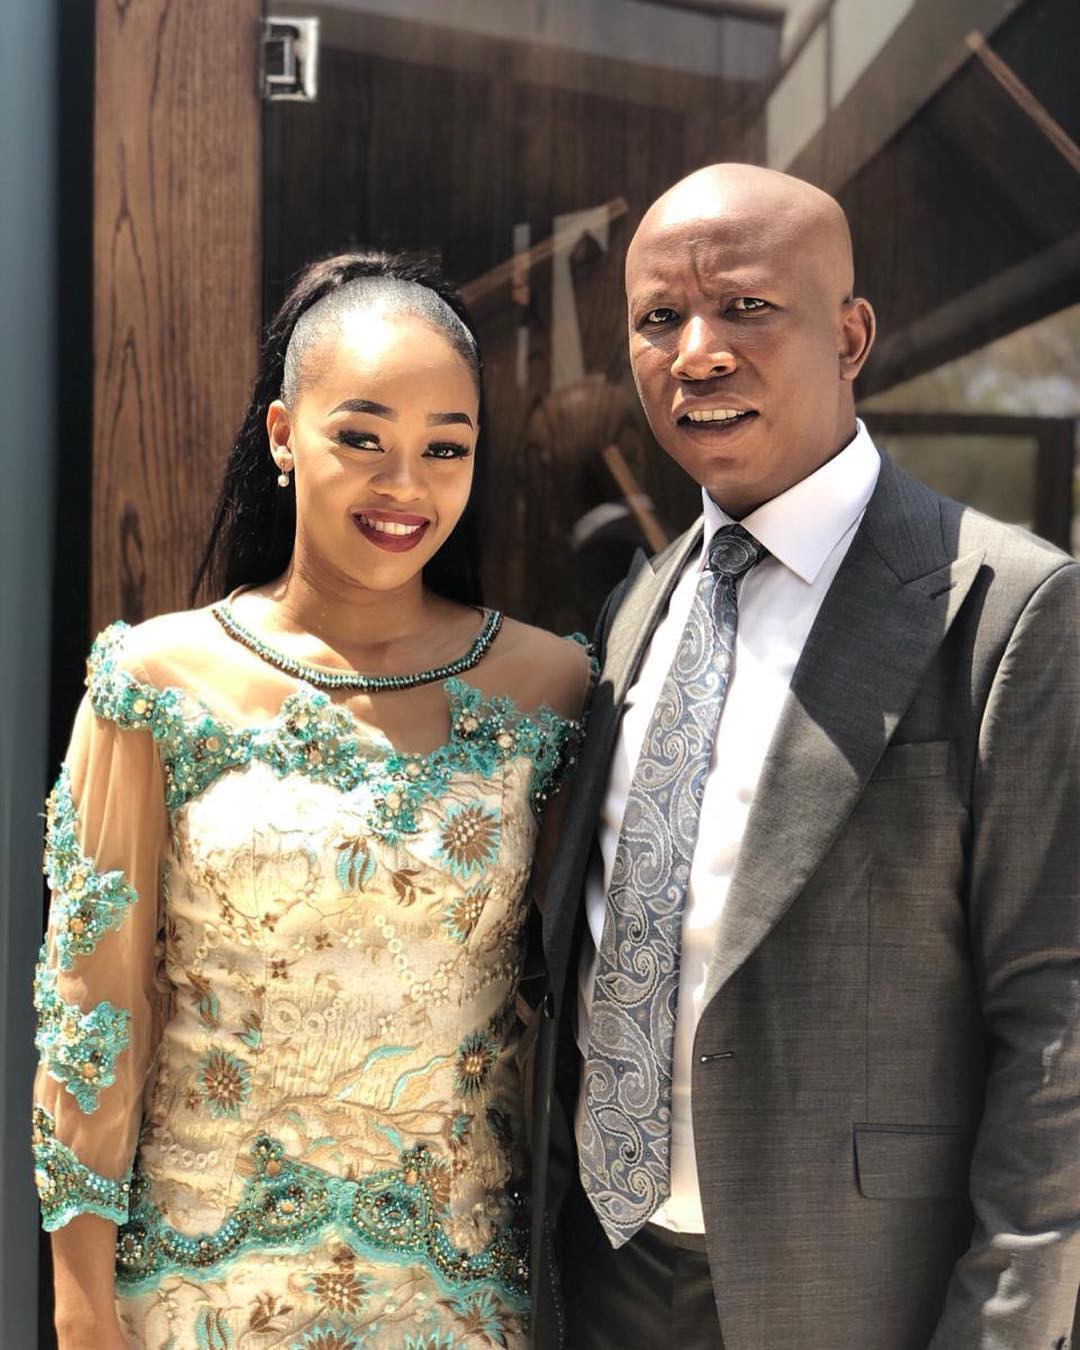 Cute pictures of Julius Malema and wife attending a wedding Mzansi365